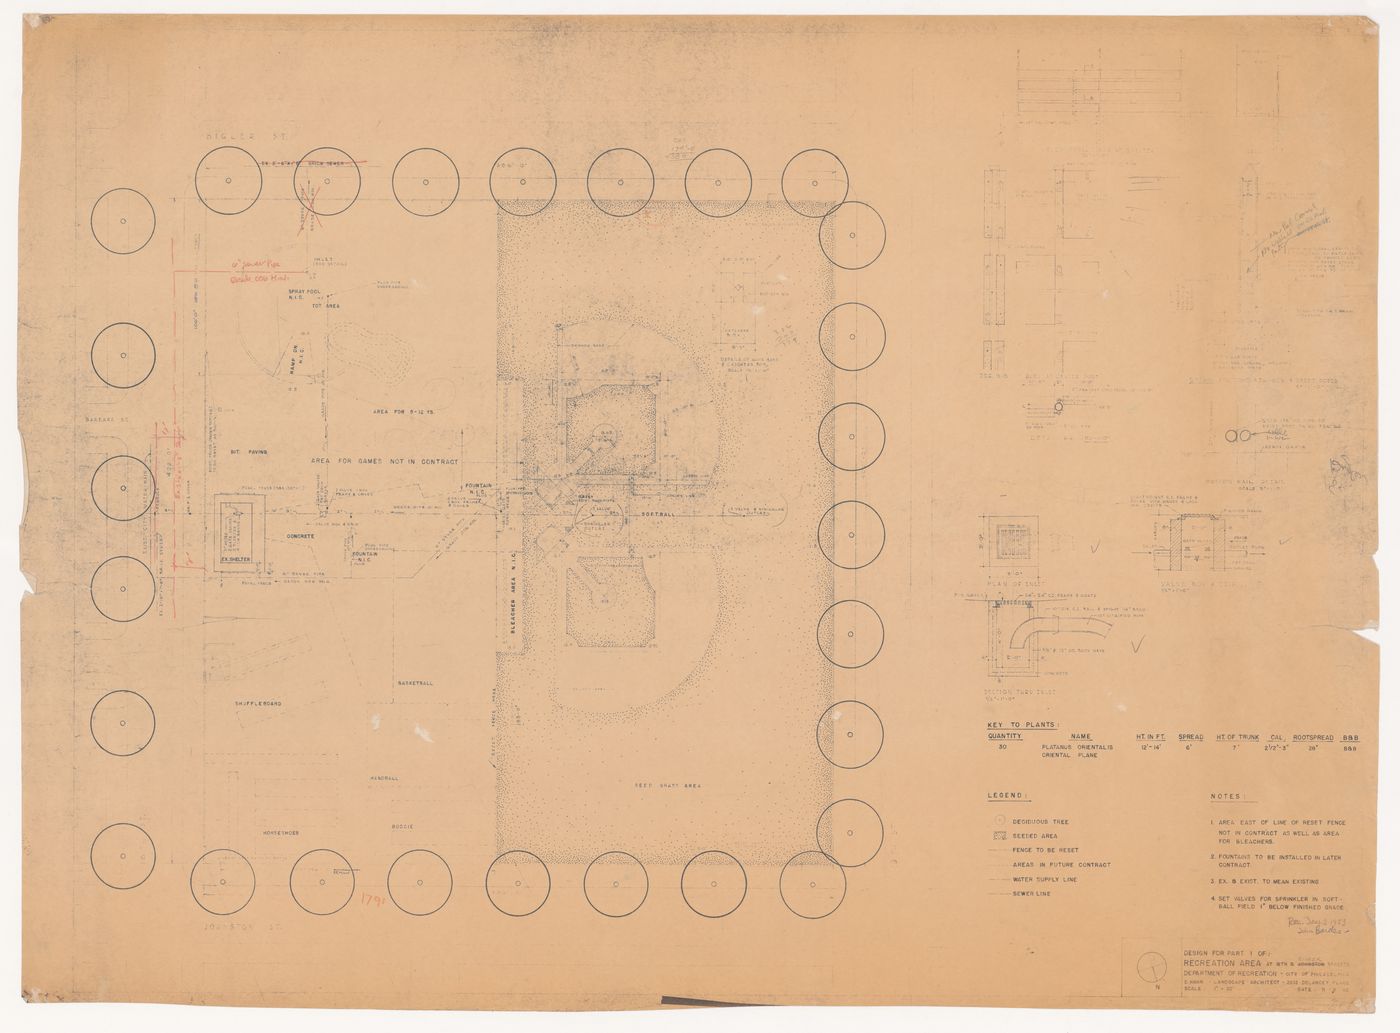 Site plan with details and notes for recreational area at 18th and Bigler Streets, Philadelphia, Pennsylvania